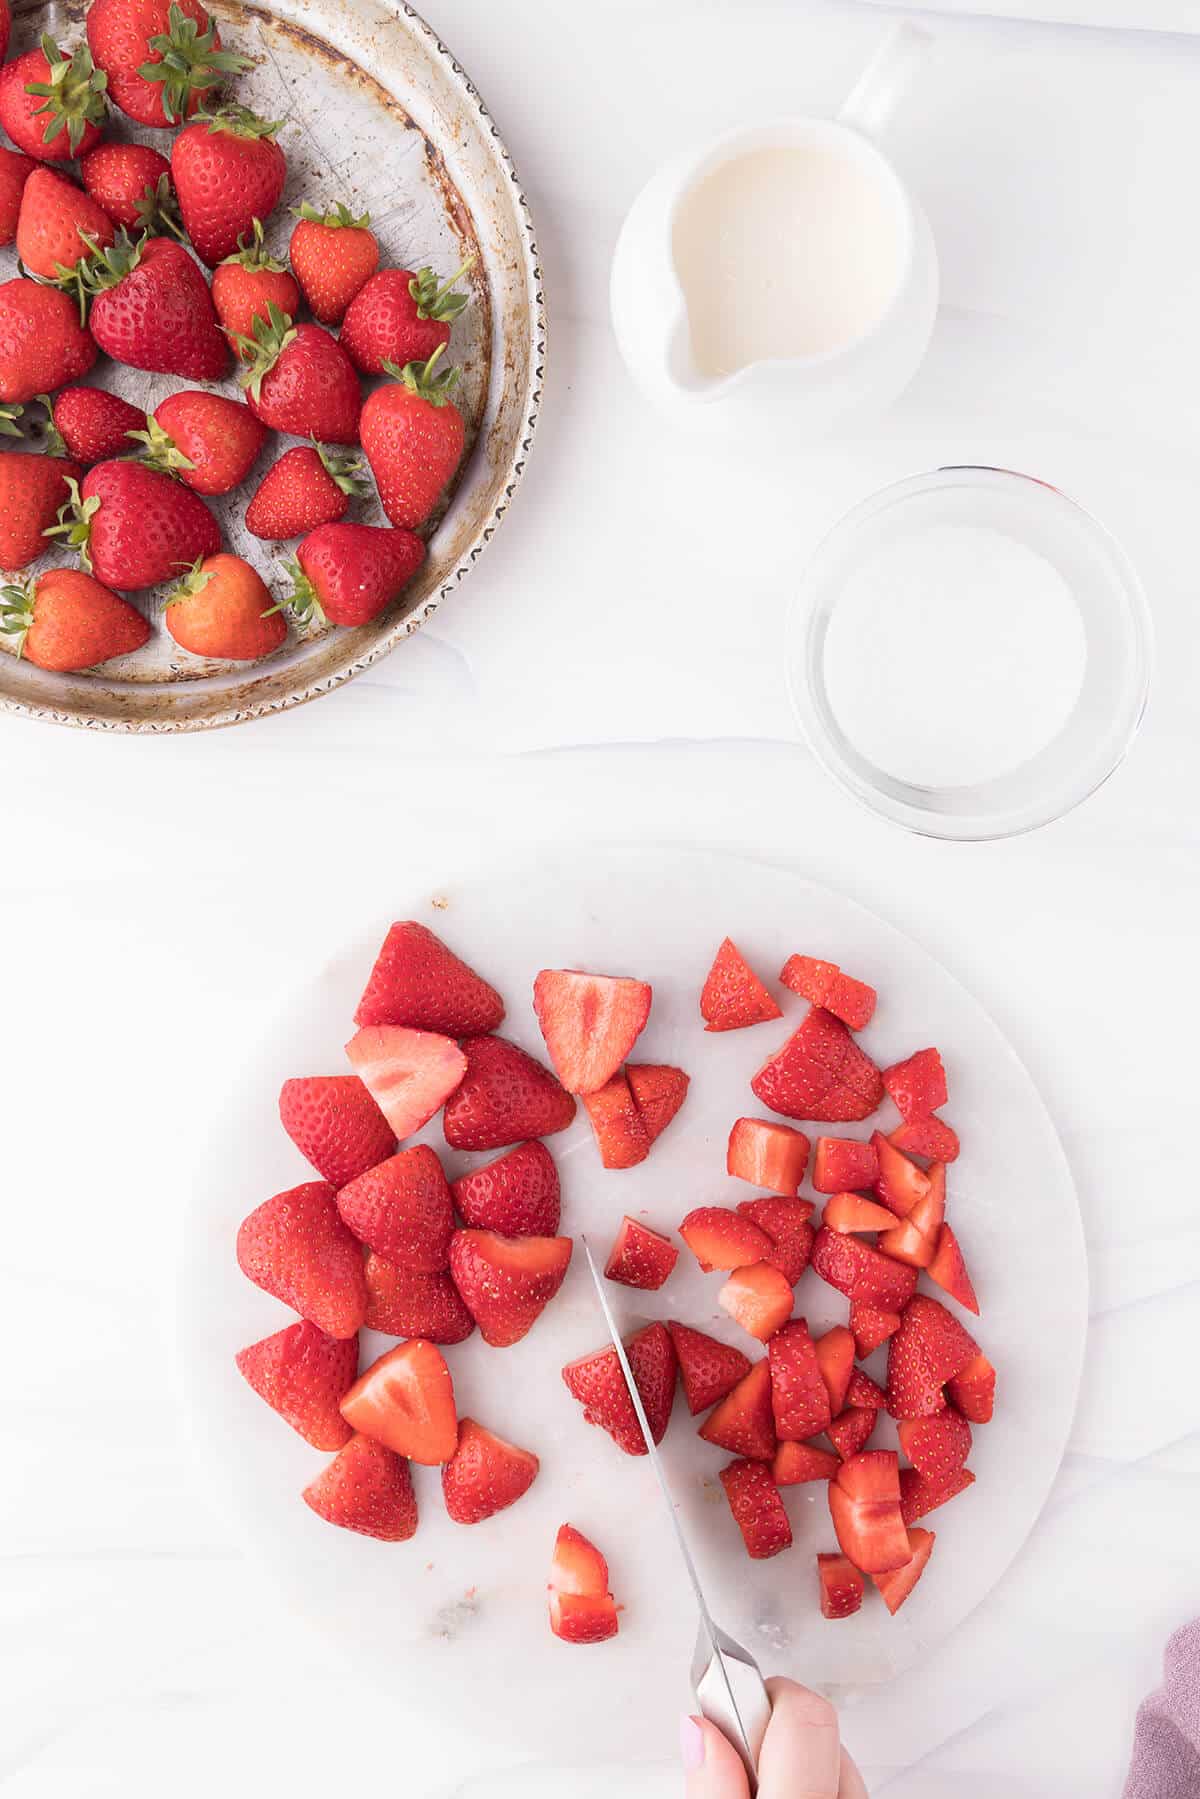 Plate filled with fresh strawberries and a chopping board with strawberries being chopped.